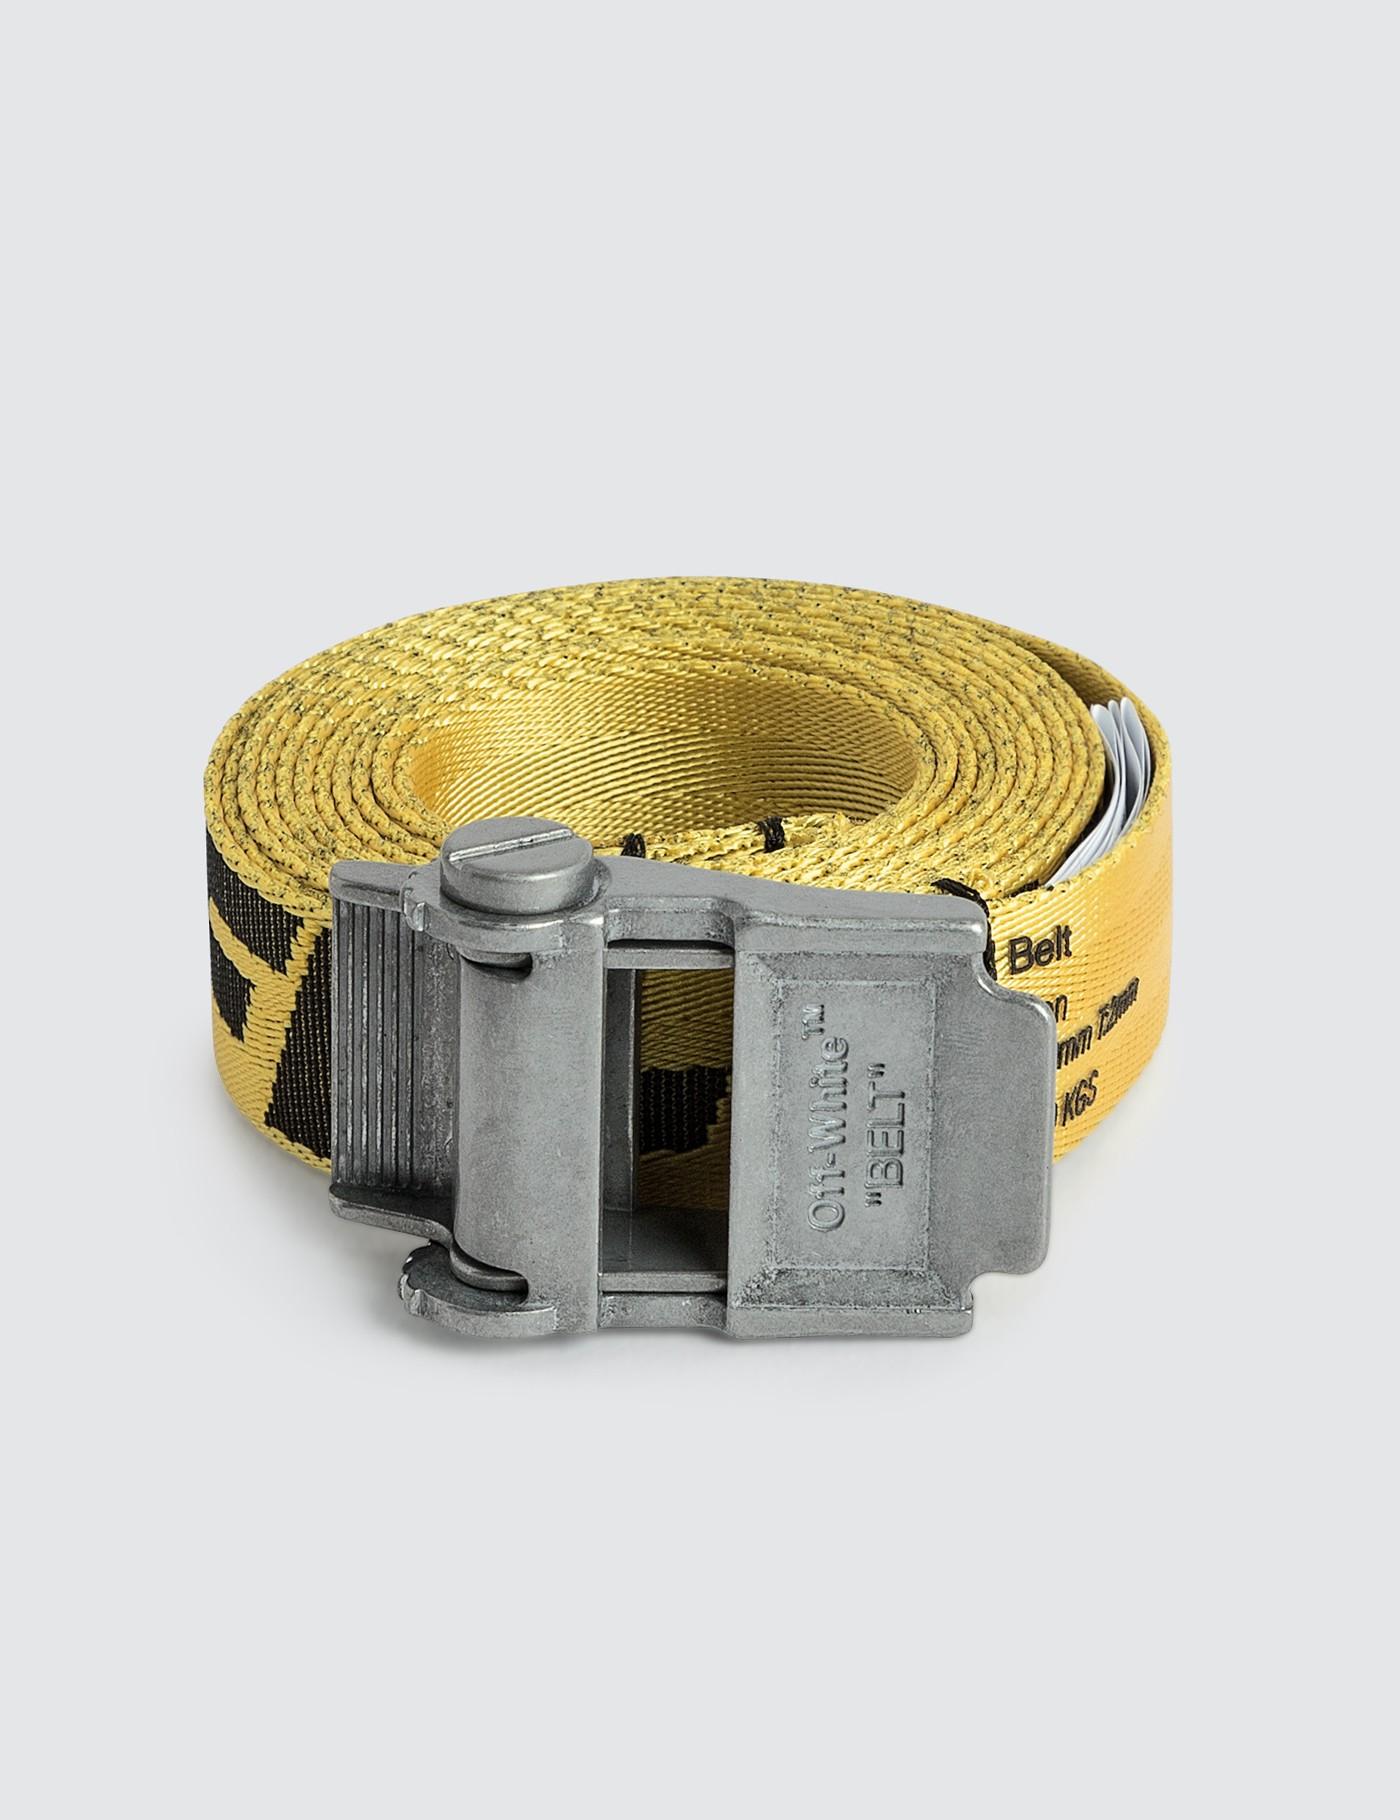 Off-White c/o Virgil Abloh Synthetic Mini 2.0 Industrial Belt in Yellow for Men - Lyst